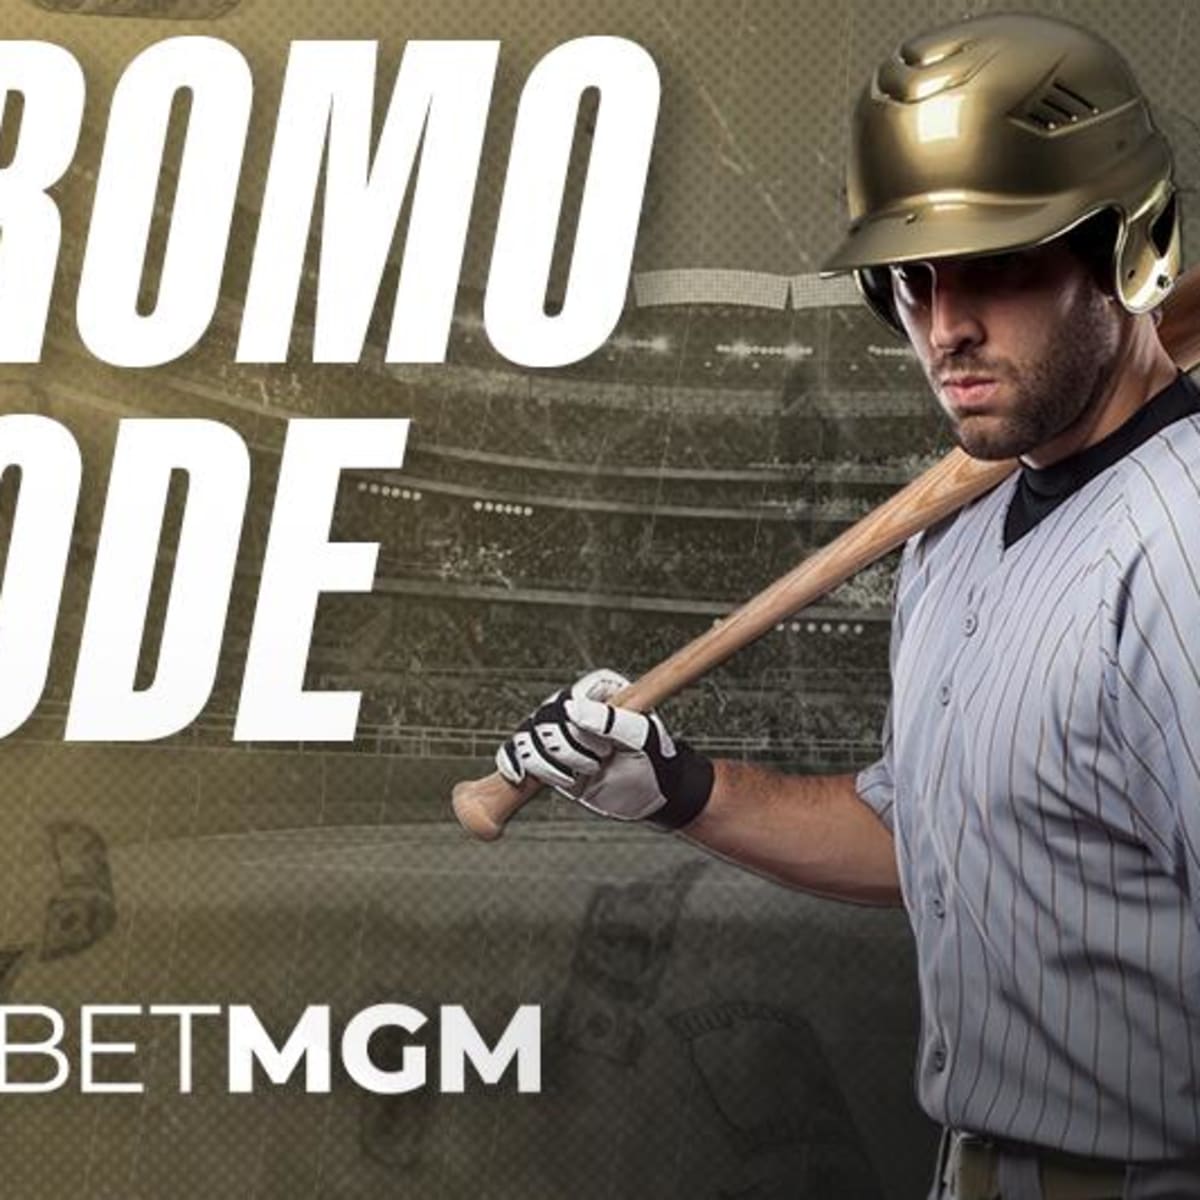 BetMGM Promo for MLB Games Today Bet $1,000 Worry-Free on Any Matchup